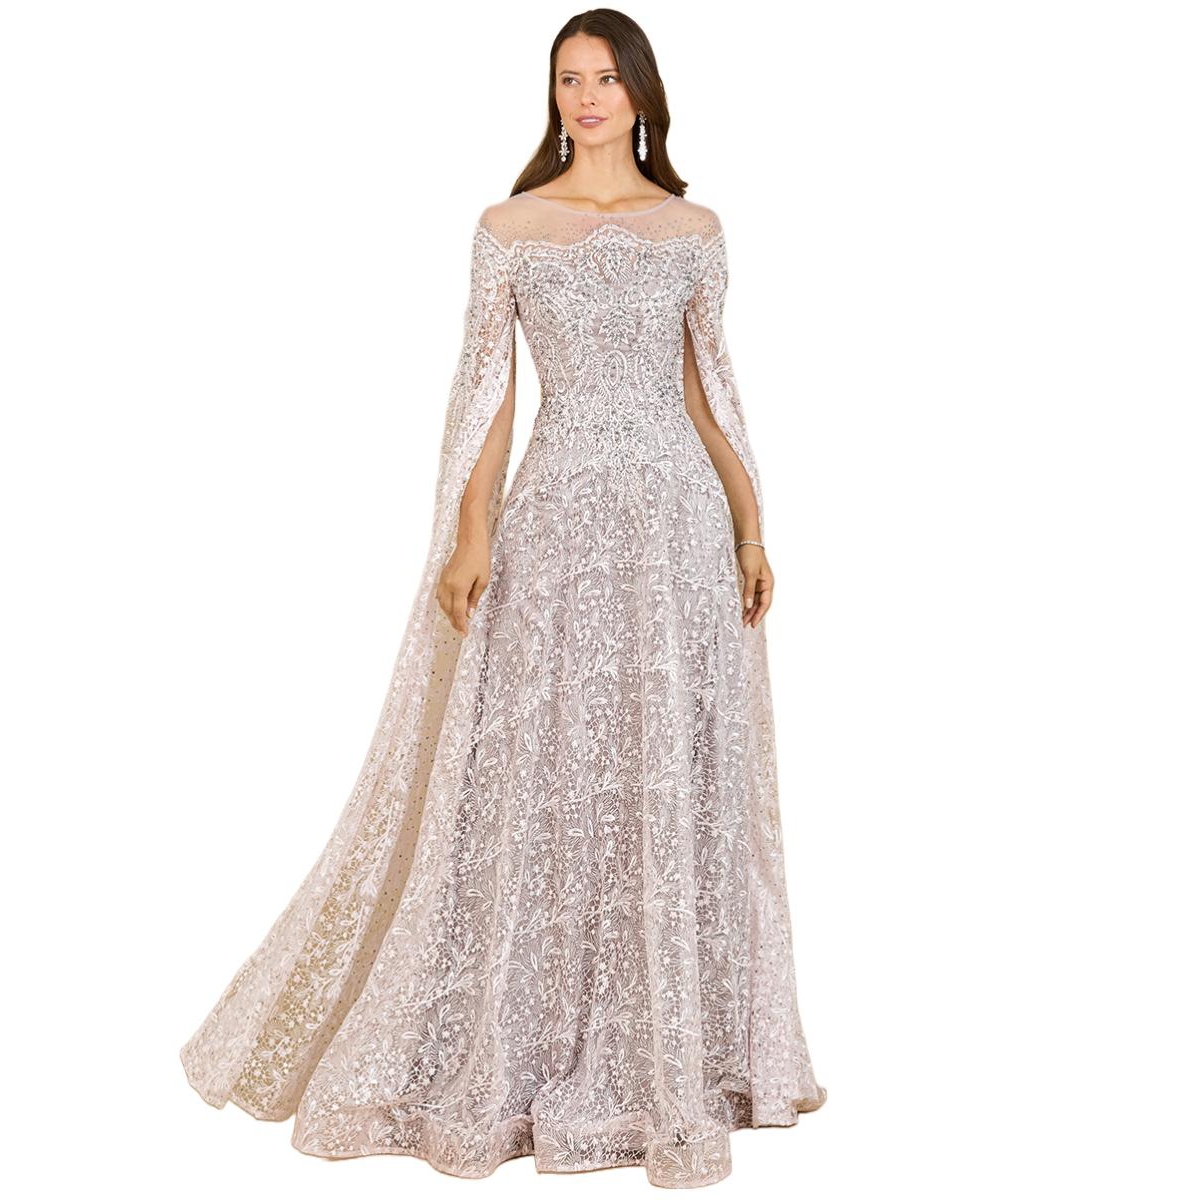 Women's Lara Lace Gown with Dramatic Cape Sleeves - Powder pink